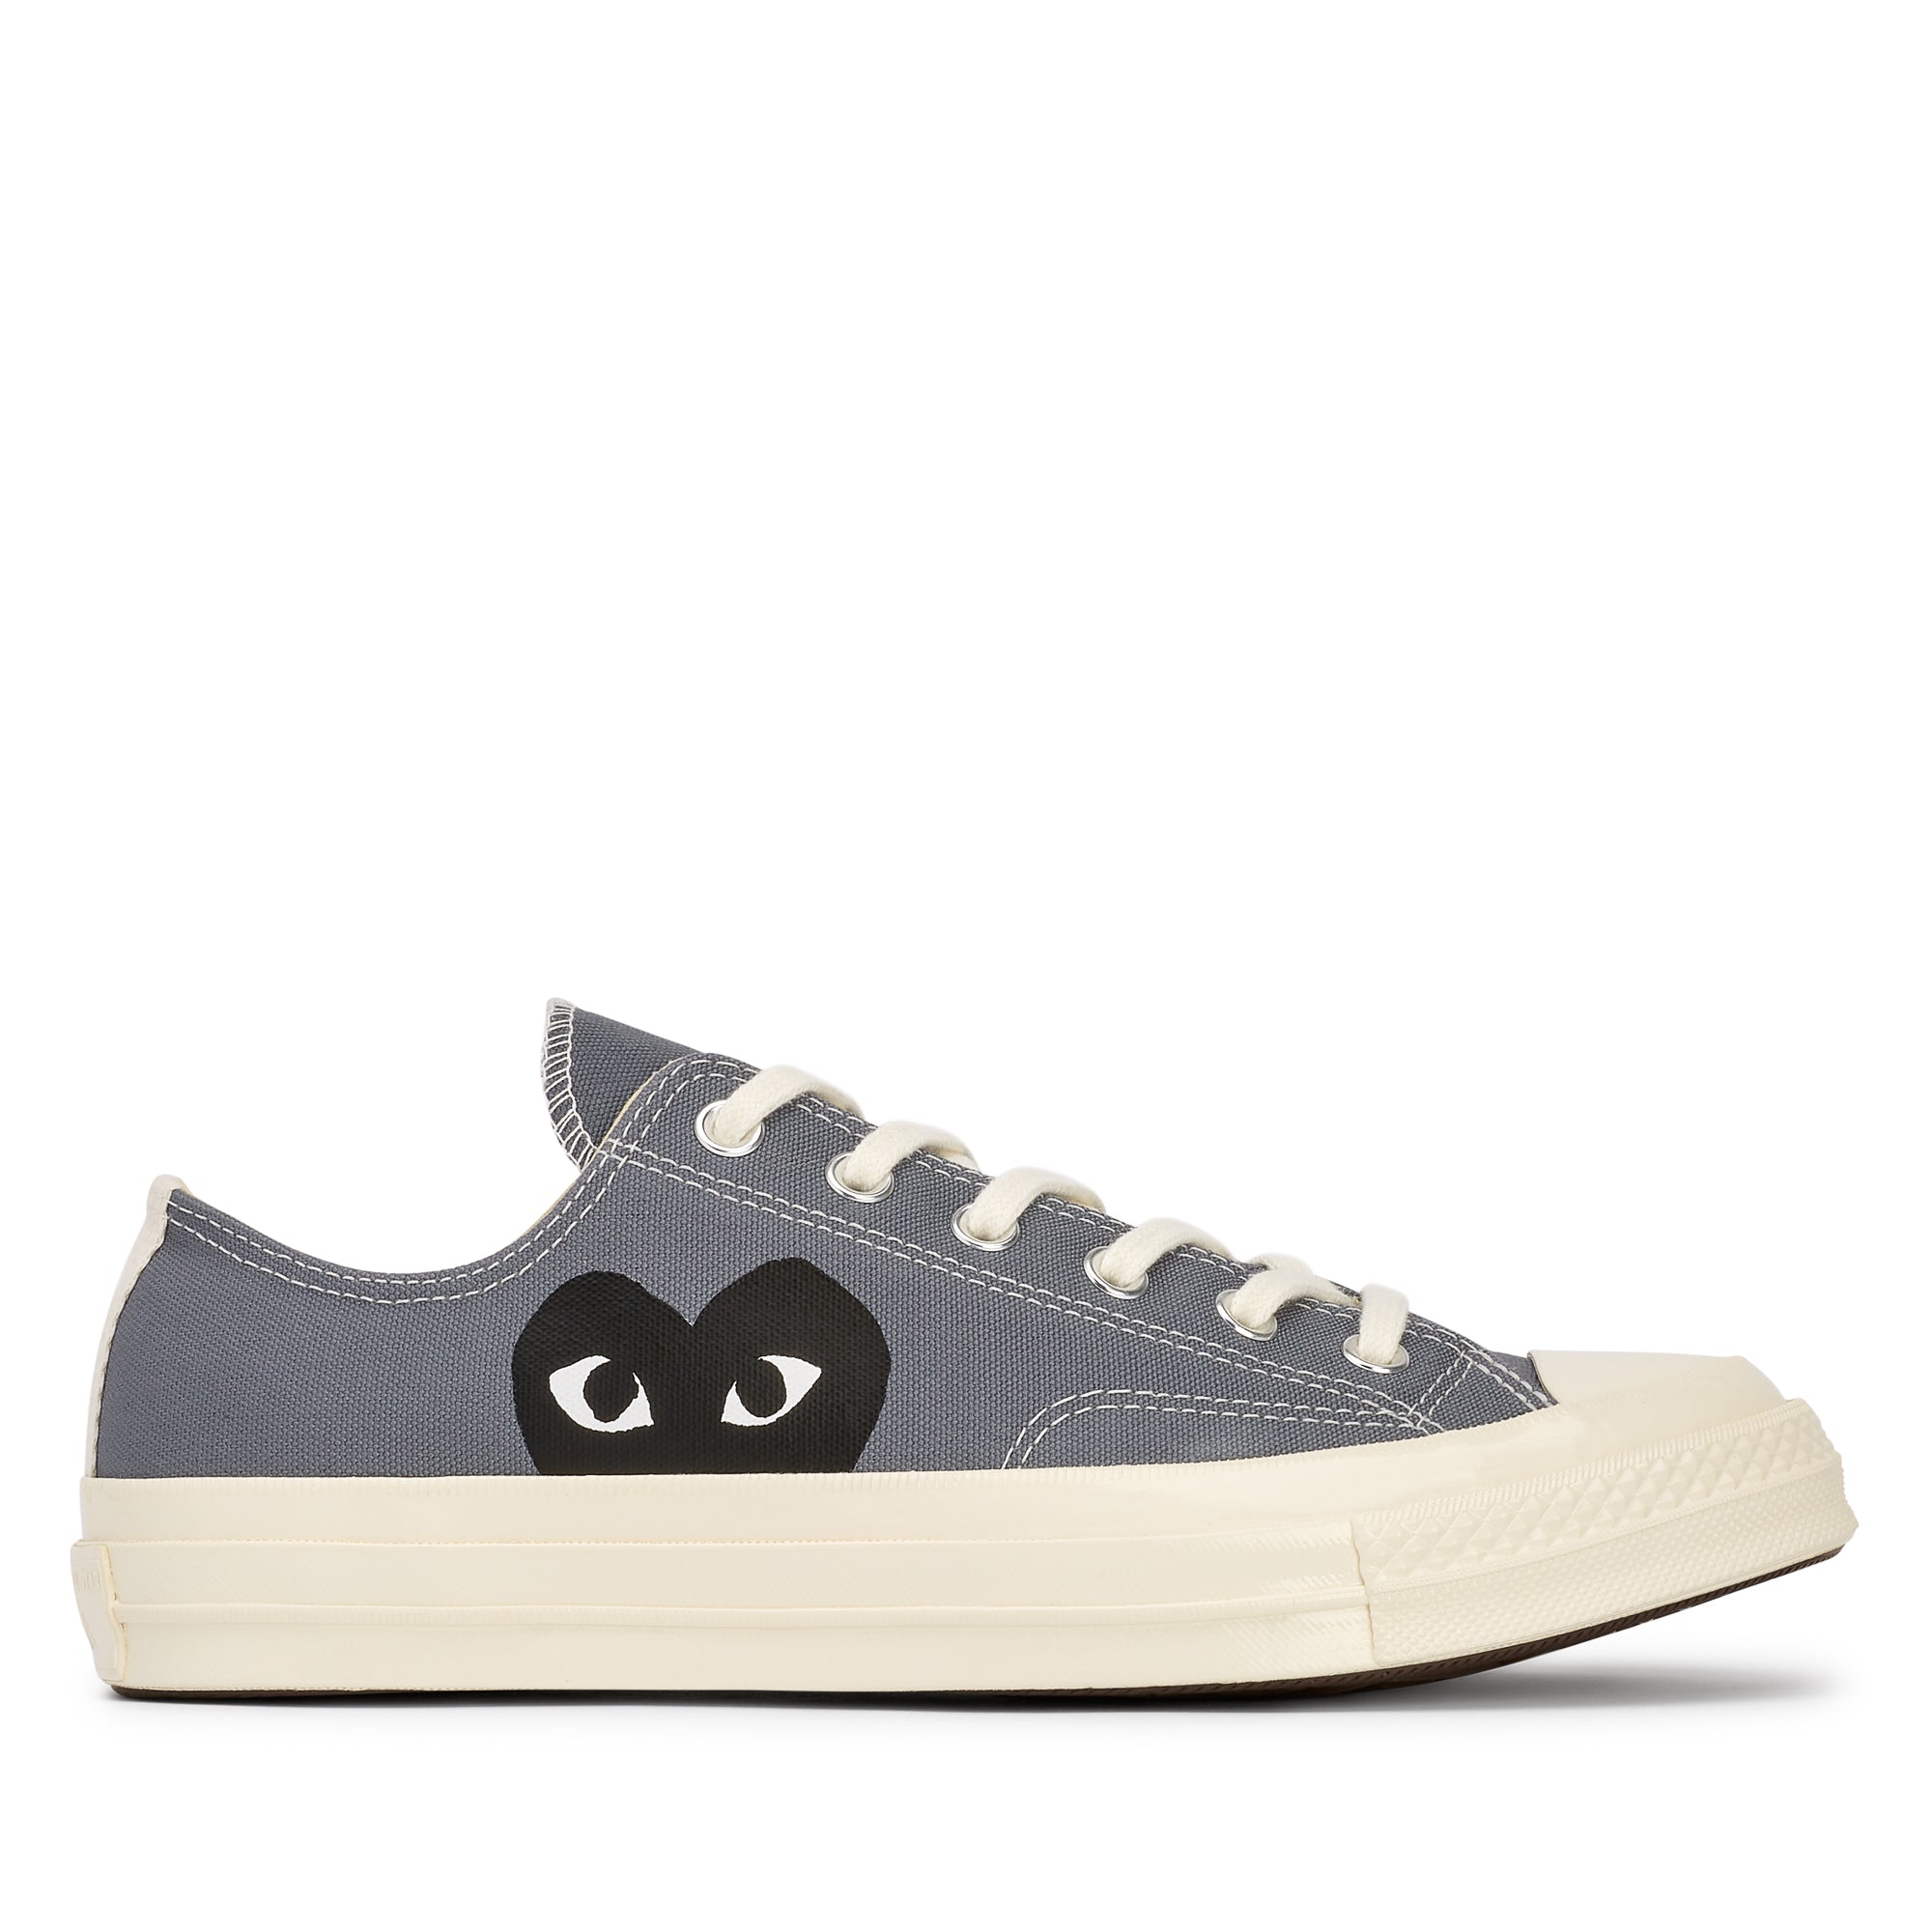 Play Converse - Black Heart Chuck Taylor All Star ’70 Low Sneakers - (Grey) view 1